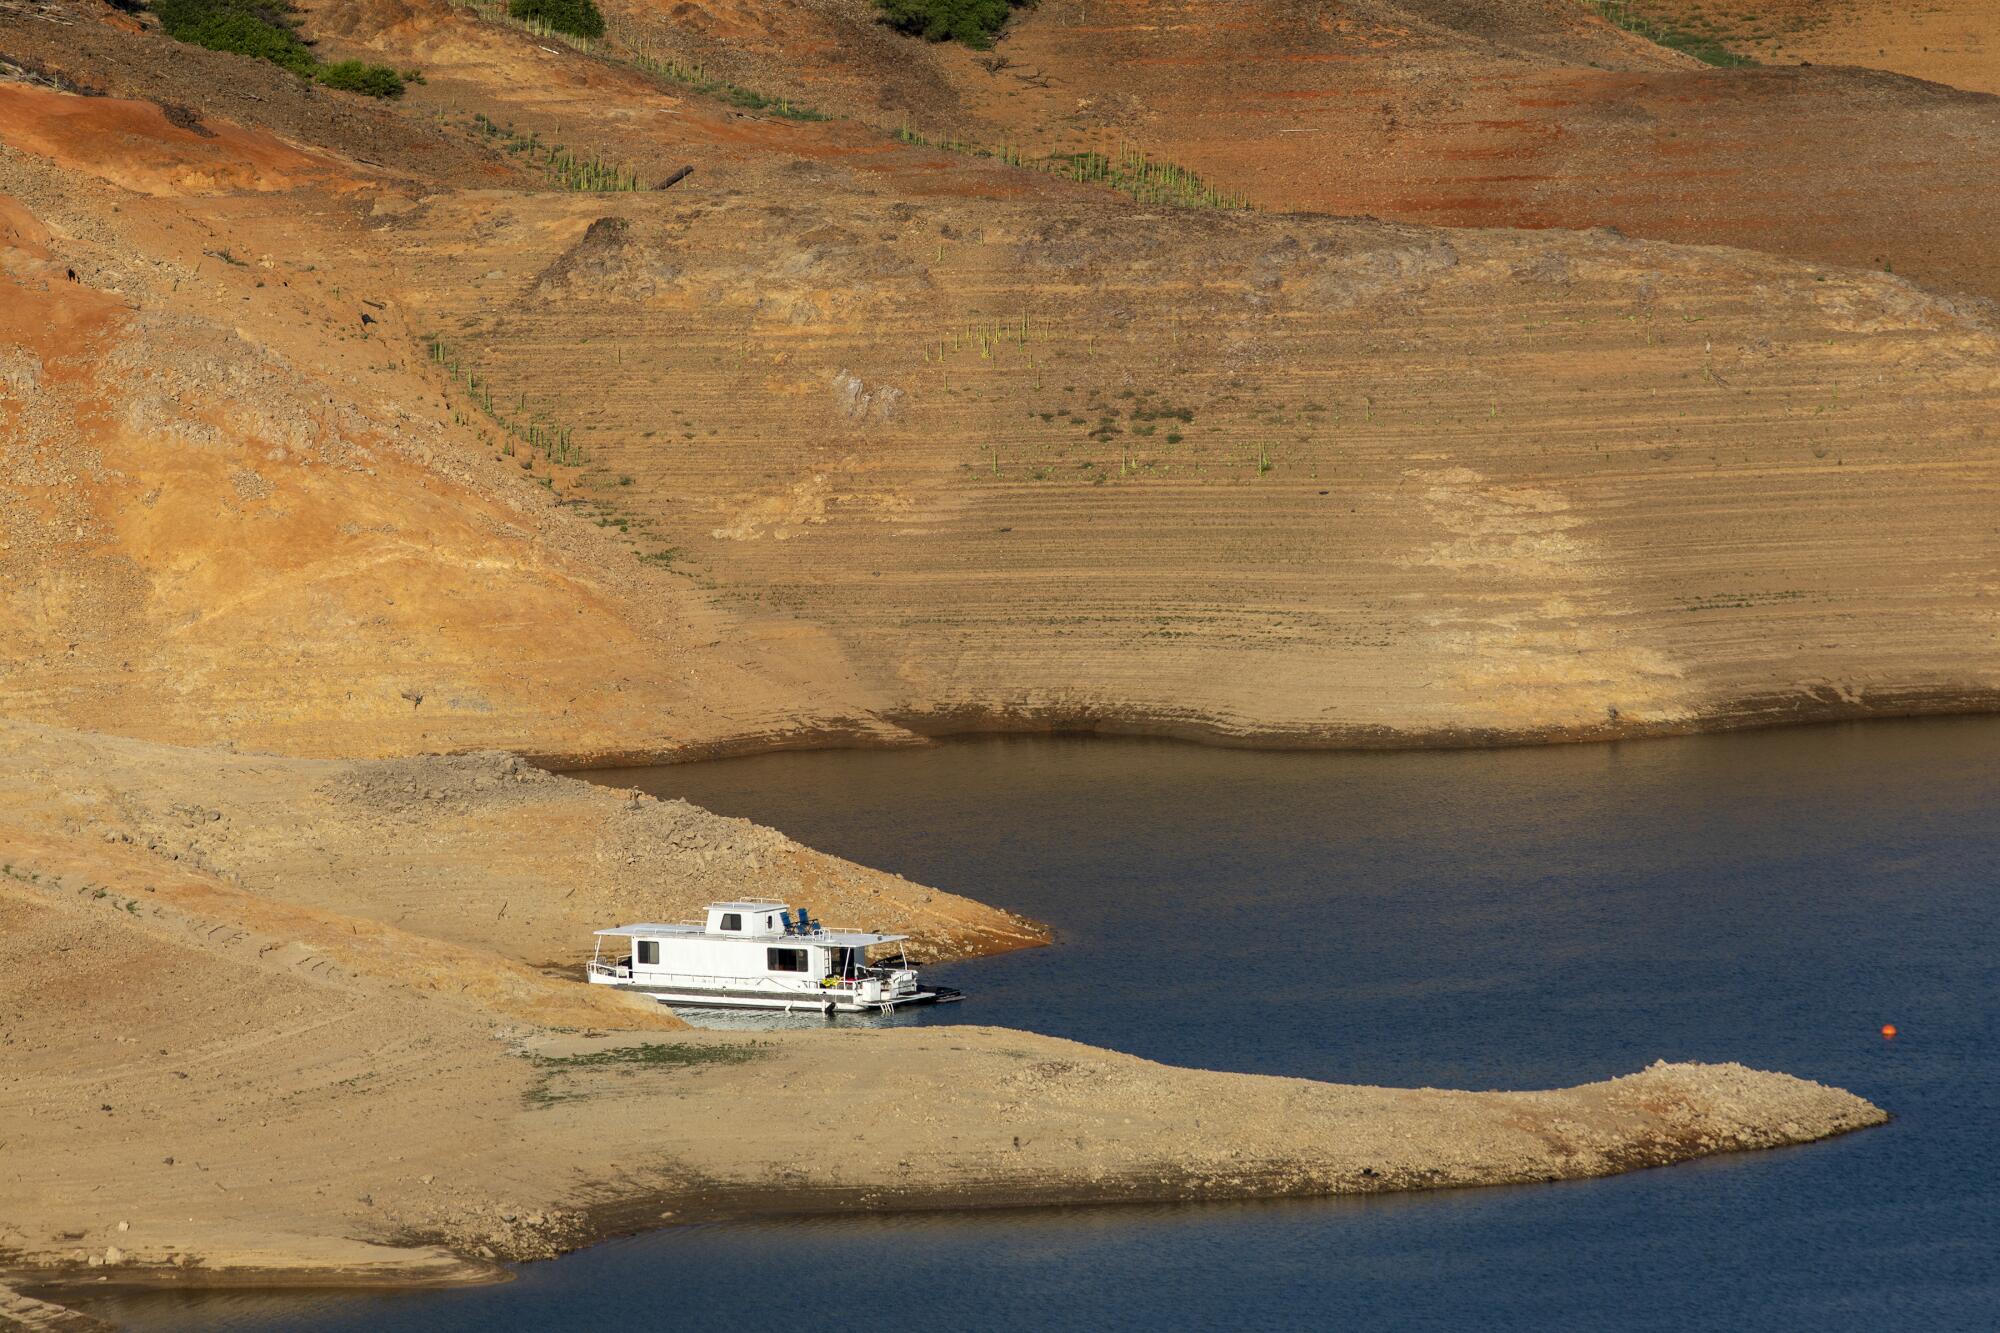 A houseboat is beached at Lake Shasta.